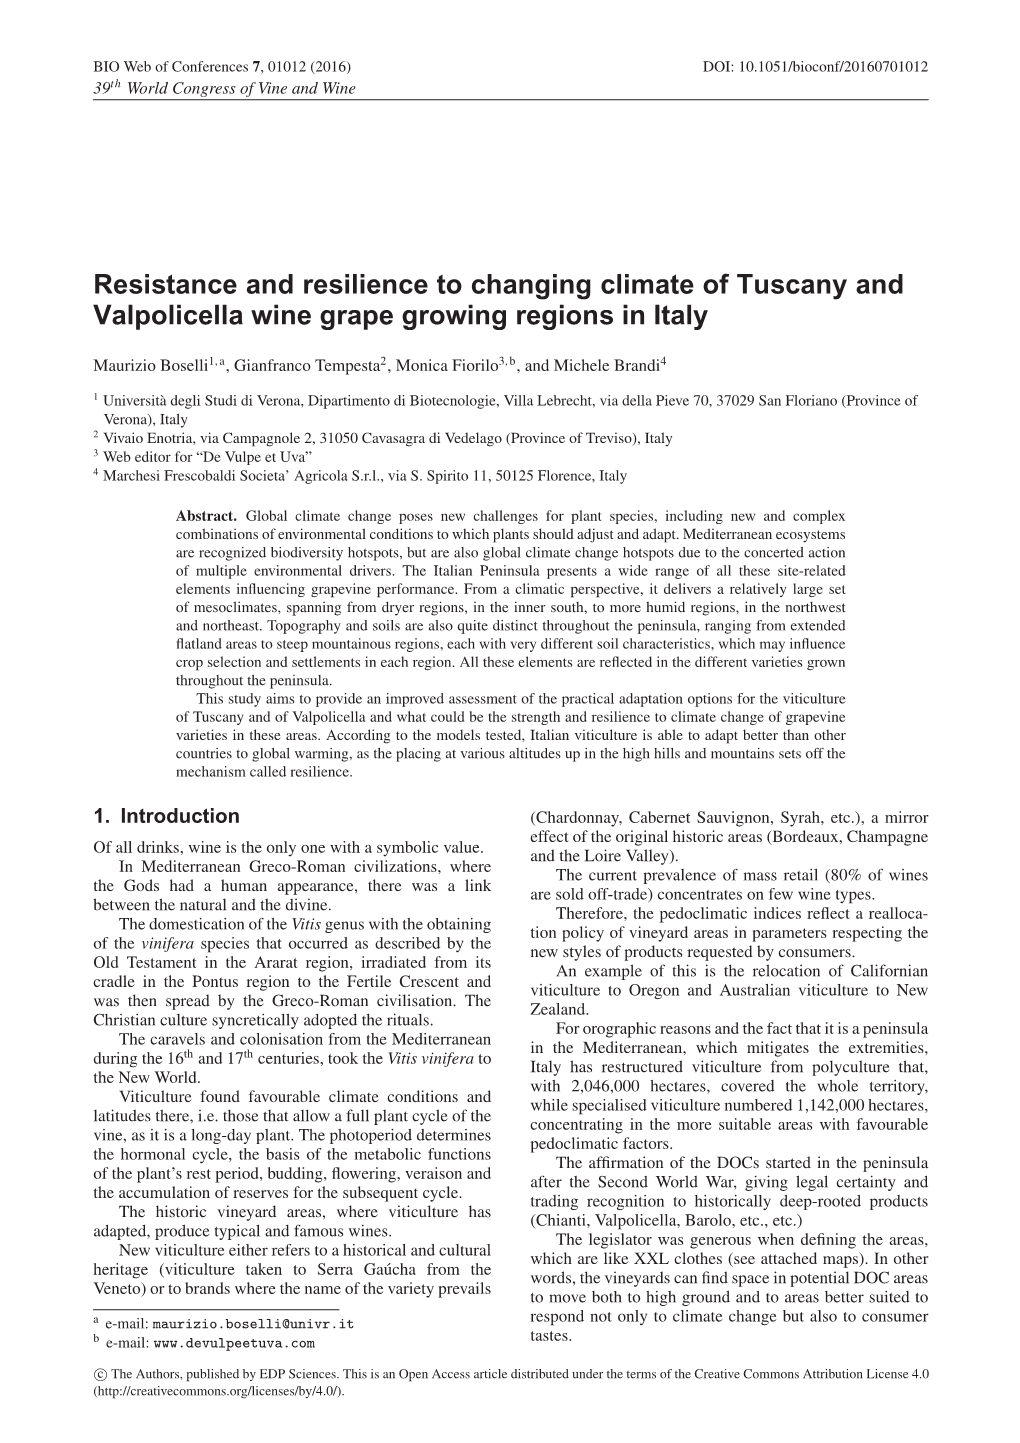 Resistance and Resilience to Changing Climate of Tuscany and Valpolicella Wine Grape Growing Regions in Italy